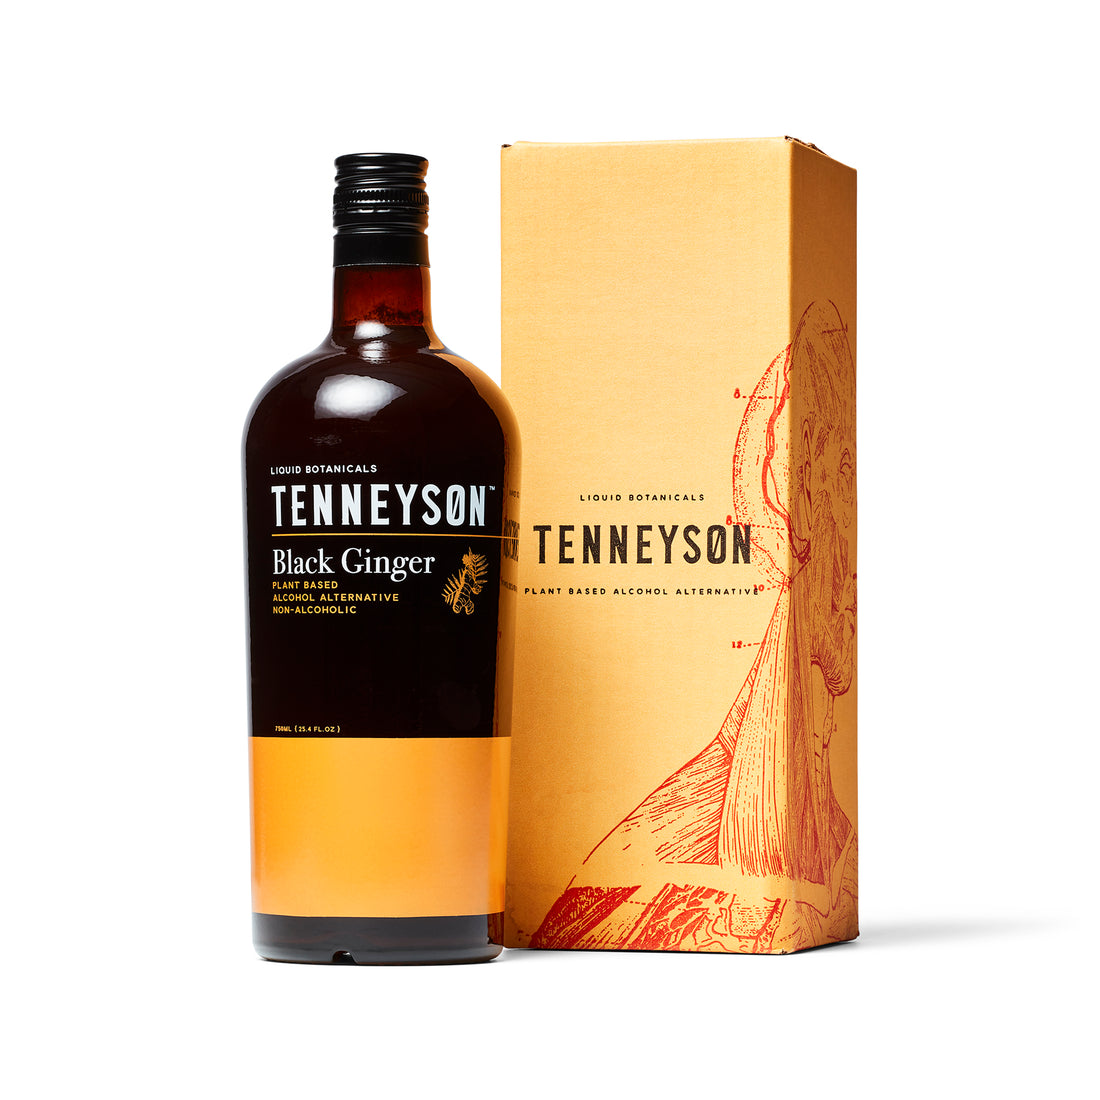 Tenneyson - Black Ginger - Plant Based Alcohol Alternative - 750ML - Boisson — Brooklyn's Non-Alcoholic Spirits, Beer, Wine, and Home Bar Shop in Cobble Hill